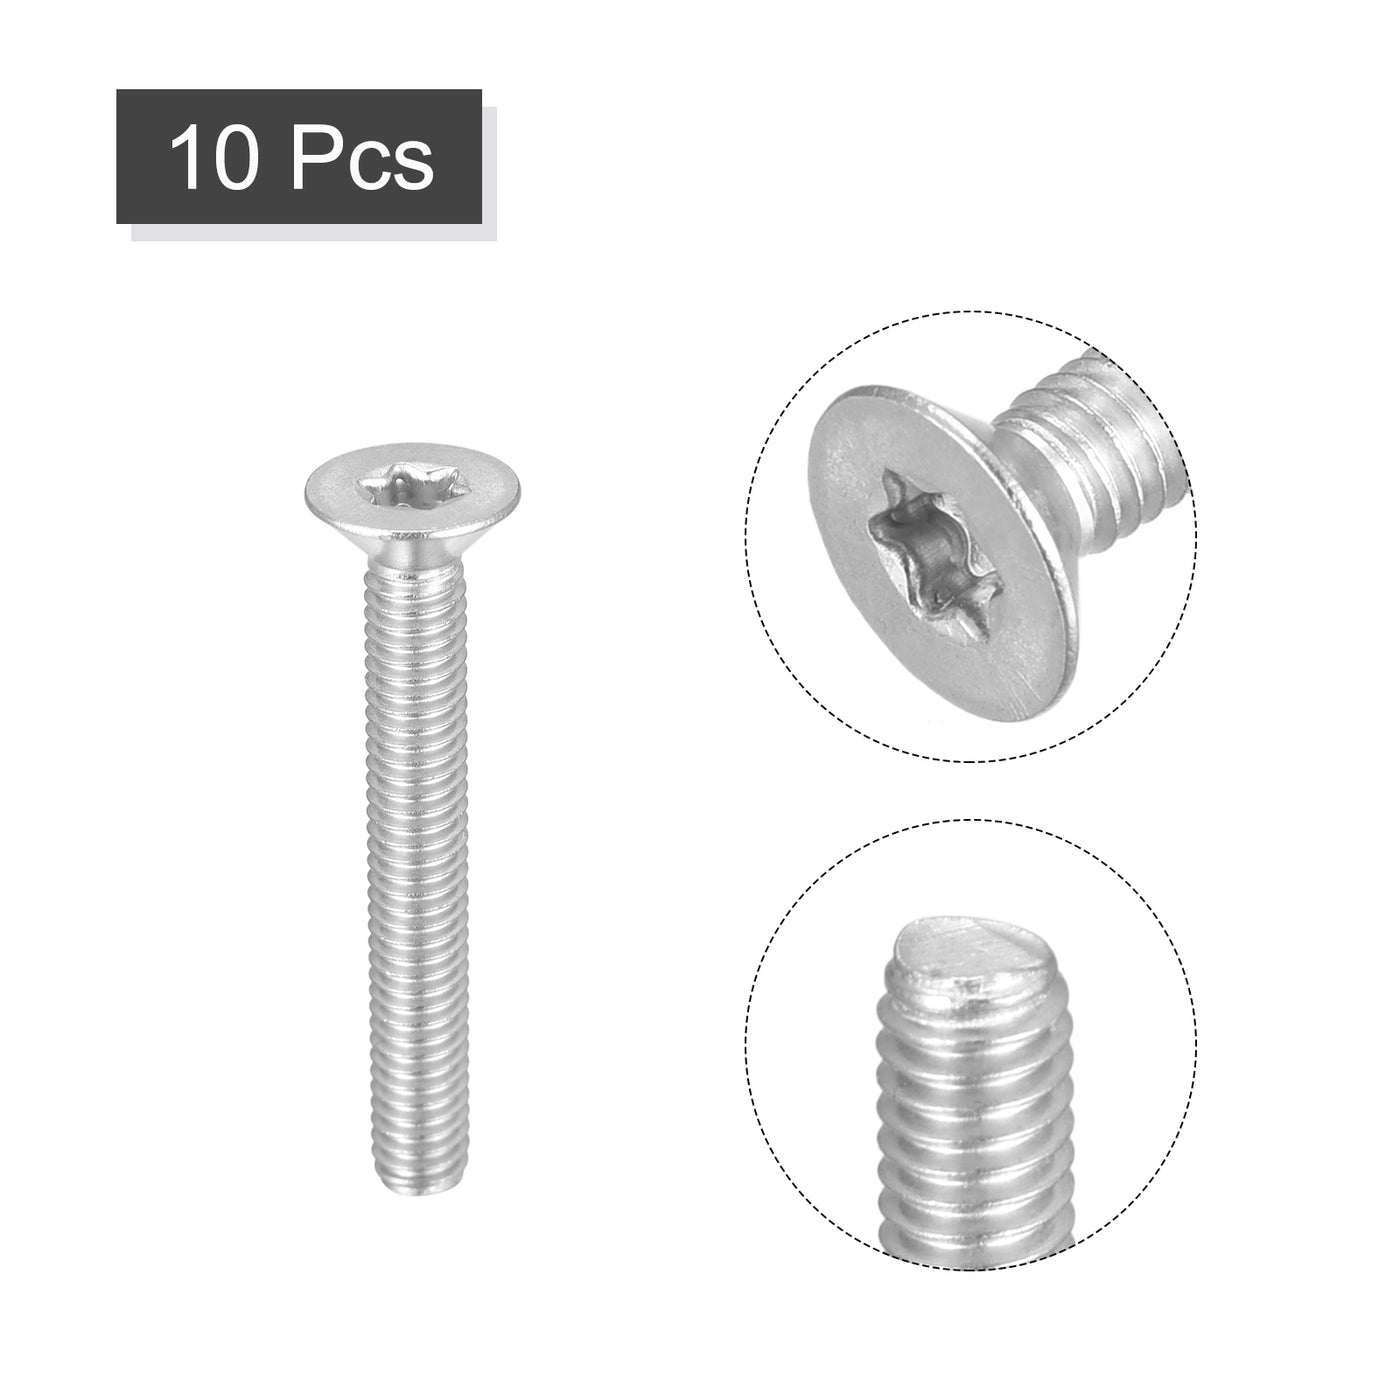 uxcell Uxcell M4x30mm Torx Security Screws, 10pcs 316 Stainless Steel Countersunk Head Screw